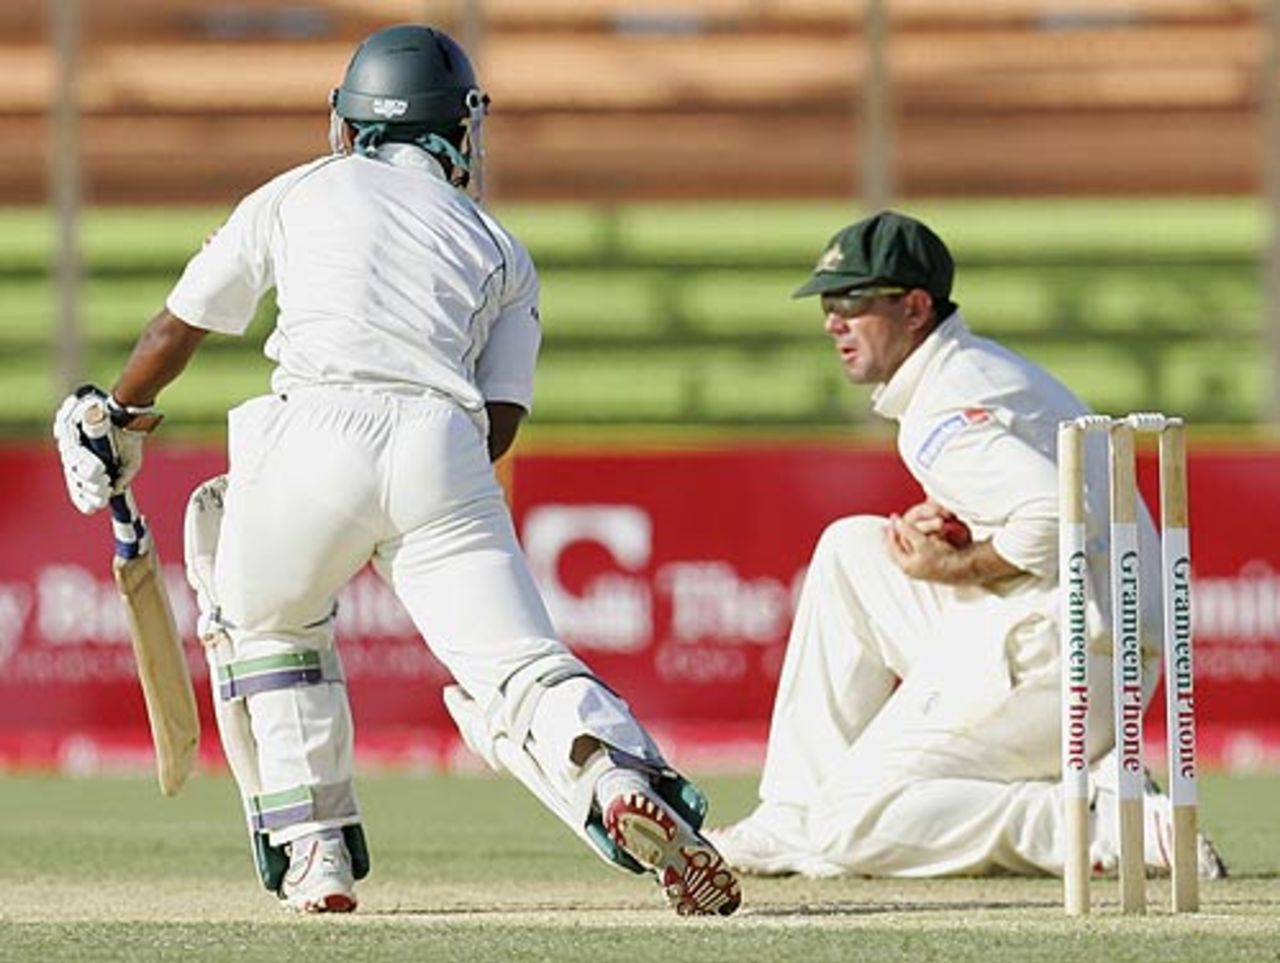 Ricky Ponting pouches Rajin Saleh at silly point, Bangladesh v Australia, 2nd Test, Chittagong, 4th day, April 19 2006